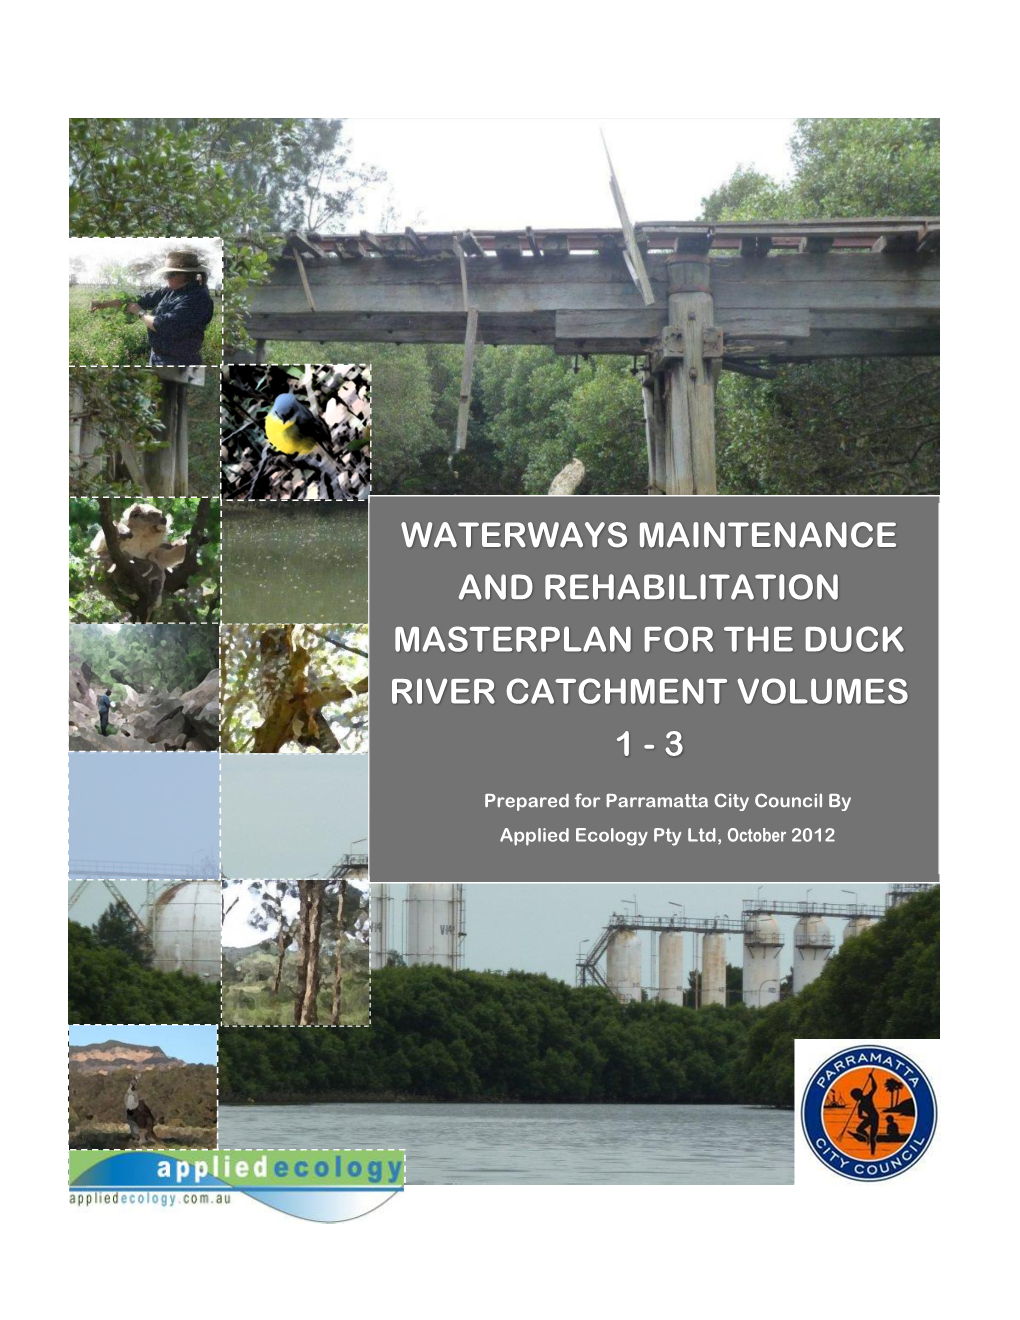 Waterways Maintenance and Rehabilitation Masterplan for the Duck River Catchment Volumes 1 - 3